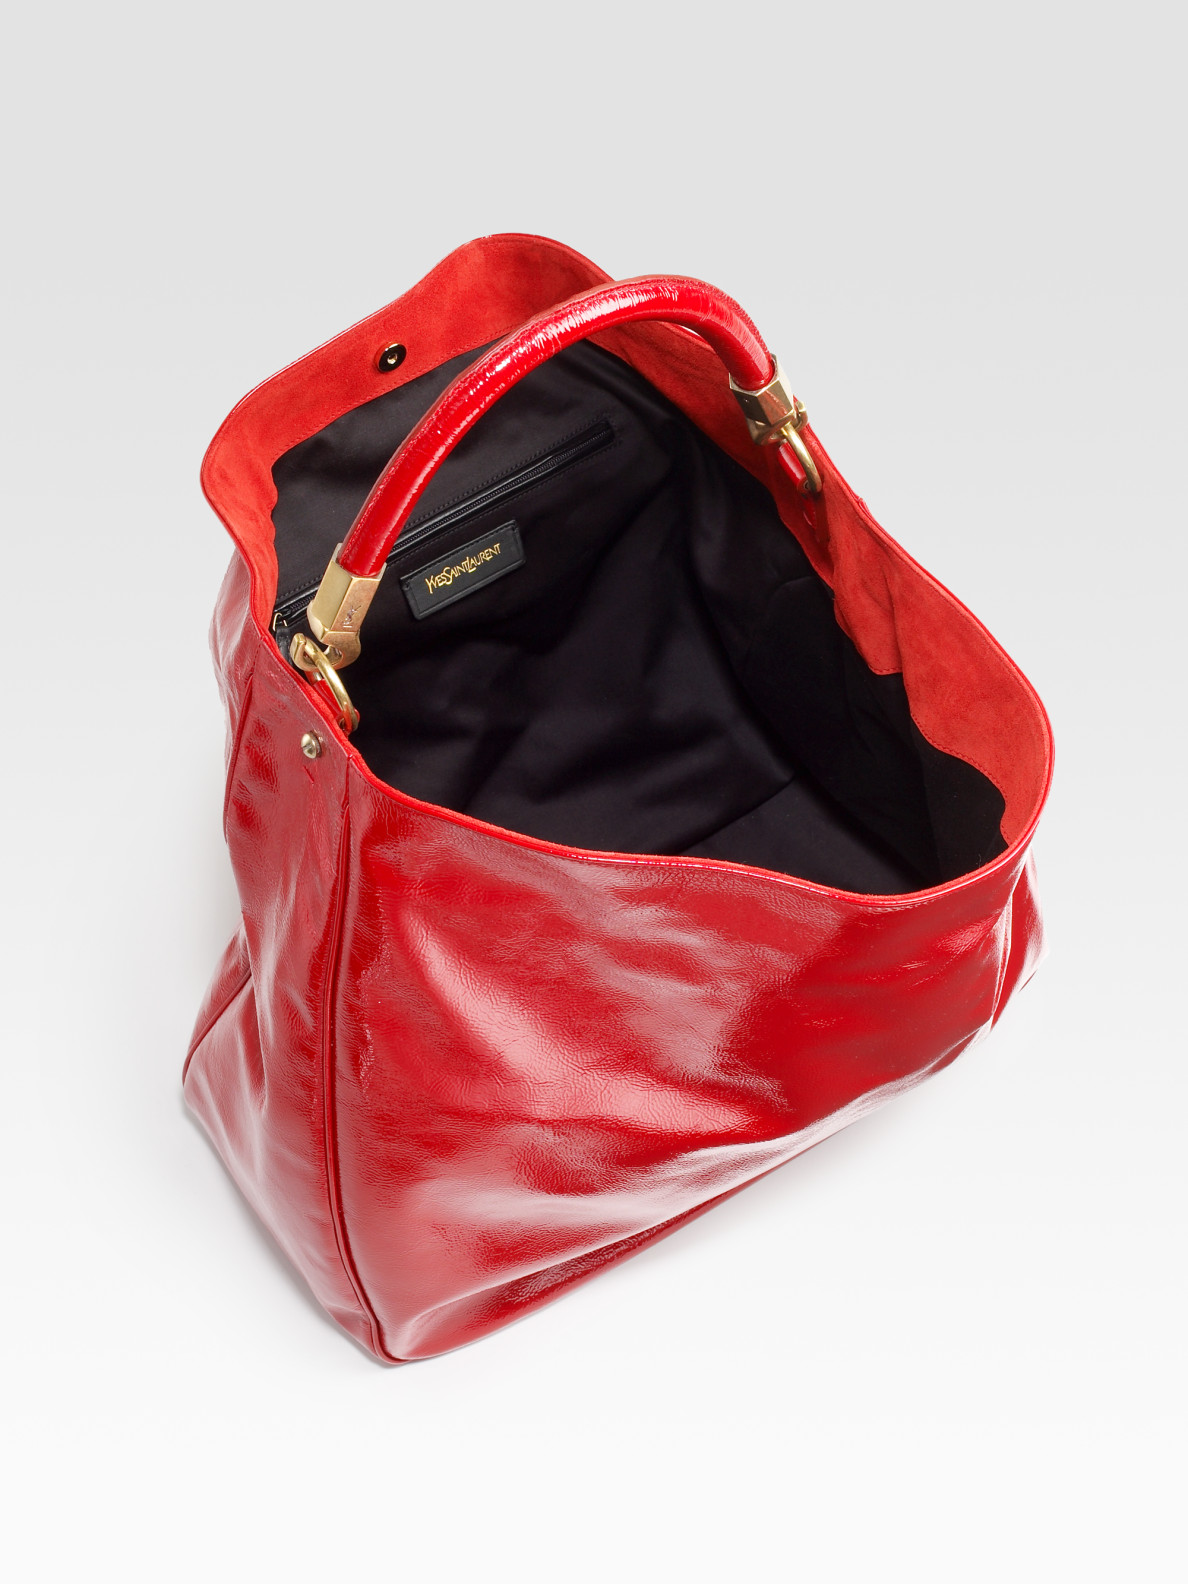 yves saint laurent replica - Saint laurent Ysl Large Patent Leather Roady Hobo in Red (poppy ...